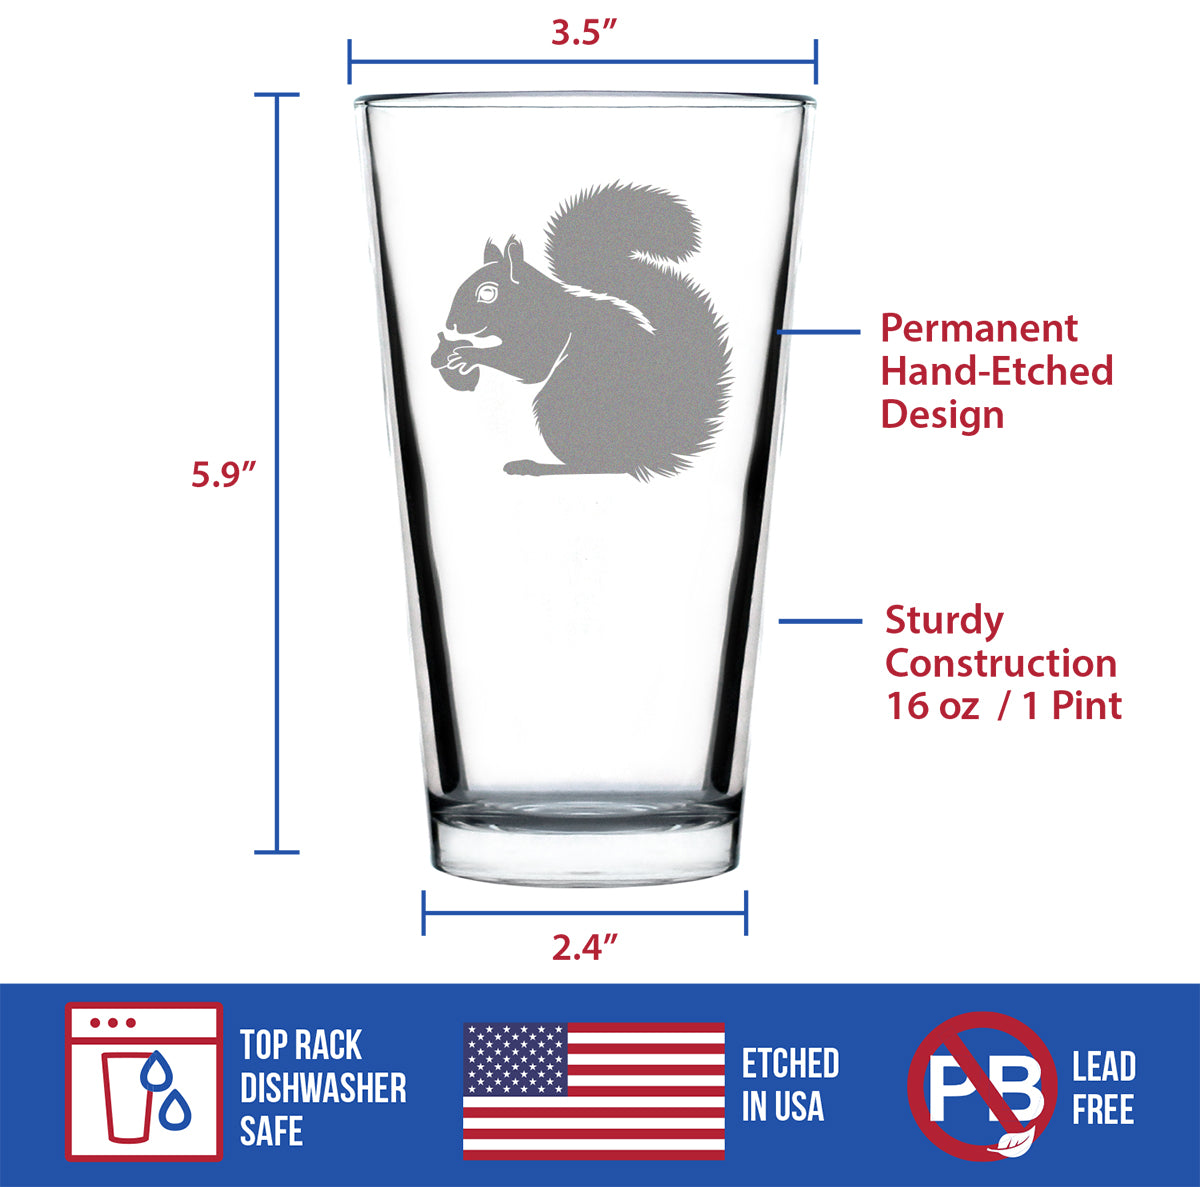 Squirrel Pint Glass for Beer - Squirrel Gifts and Decor with Squirrels - 16 Oz Glasses